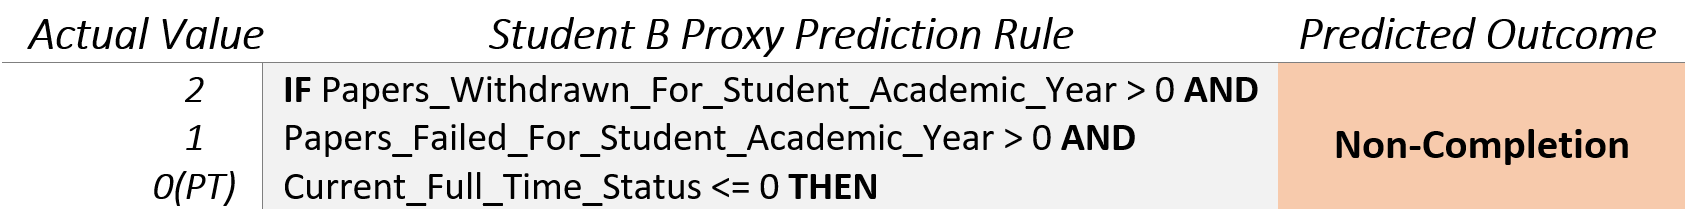 Proxy model explanation of predictions for Student A and B.